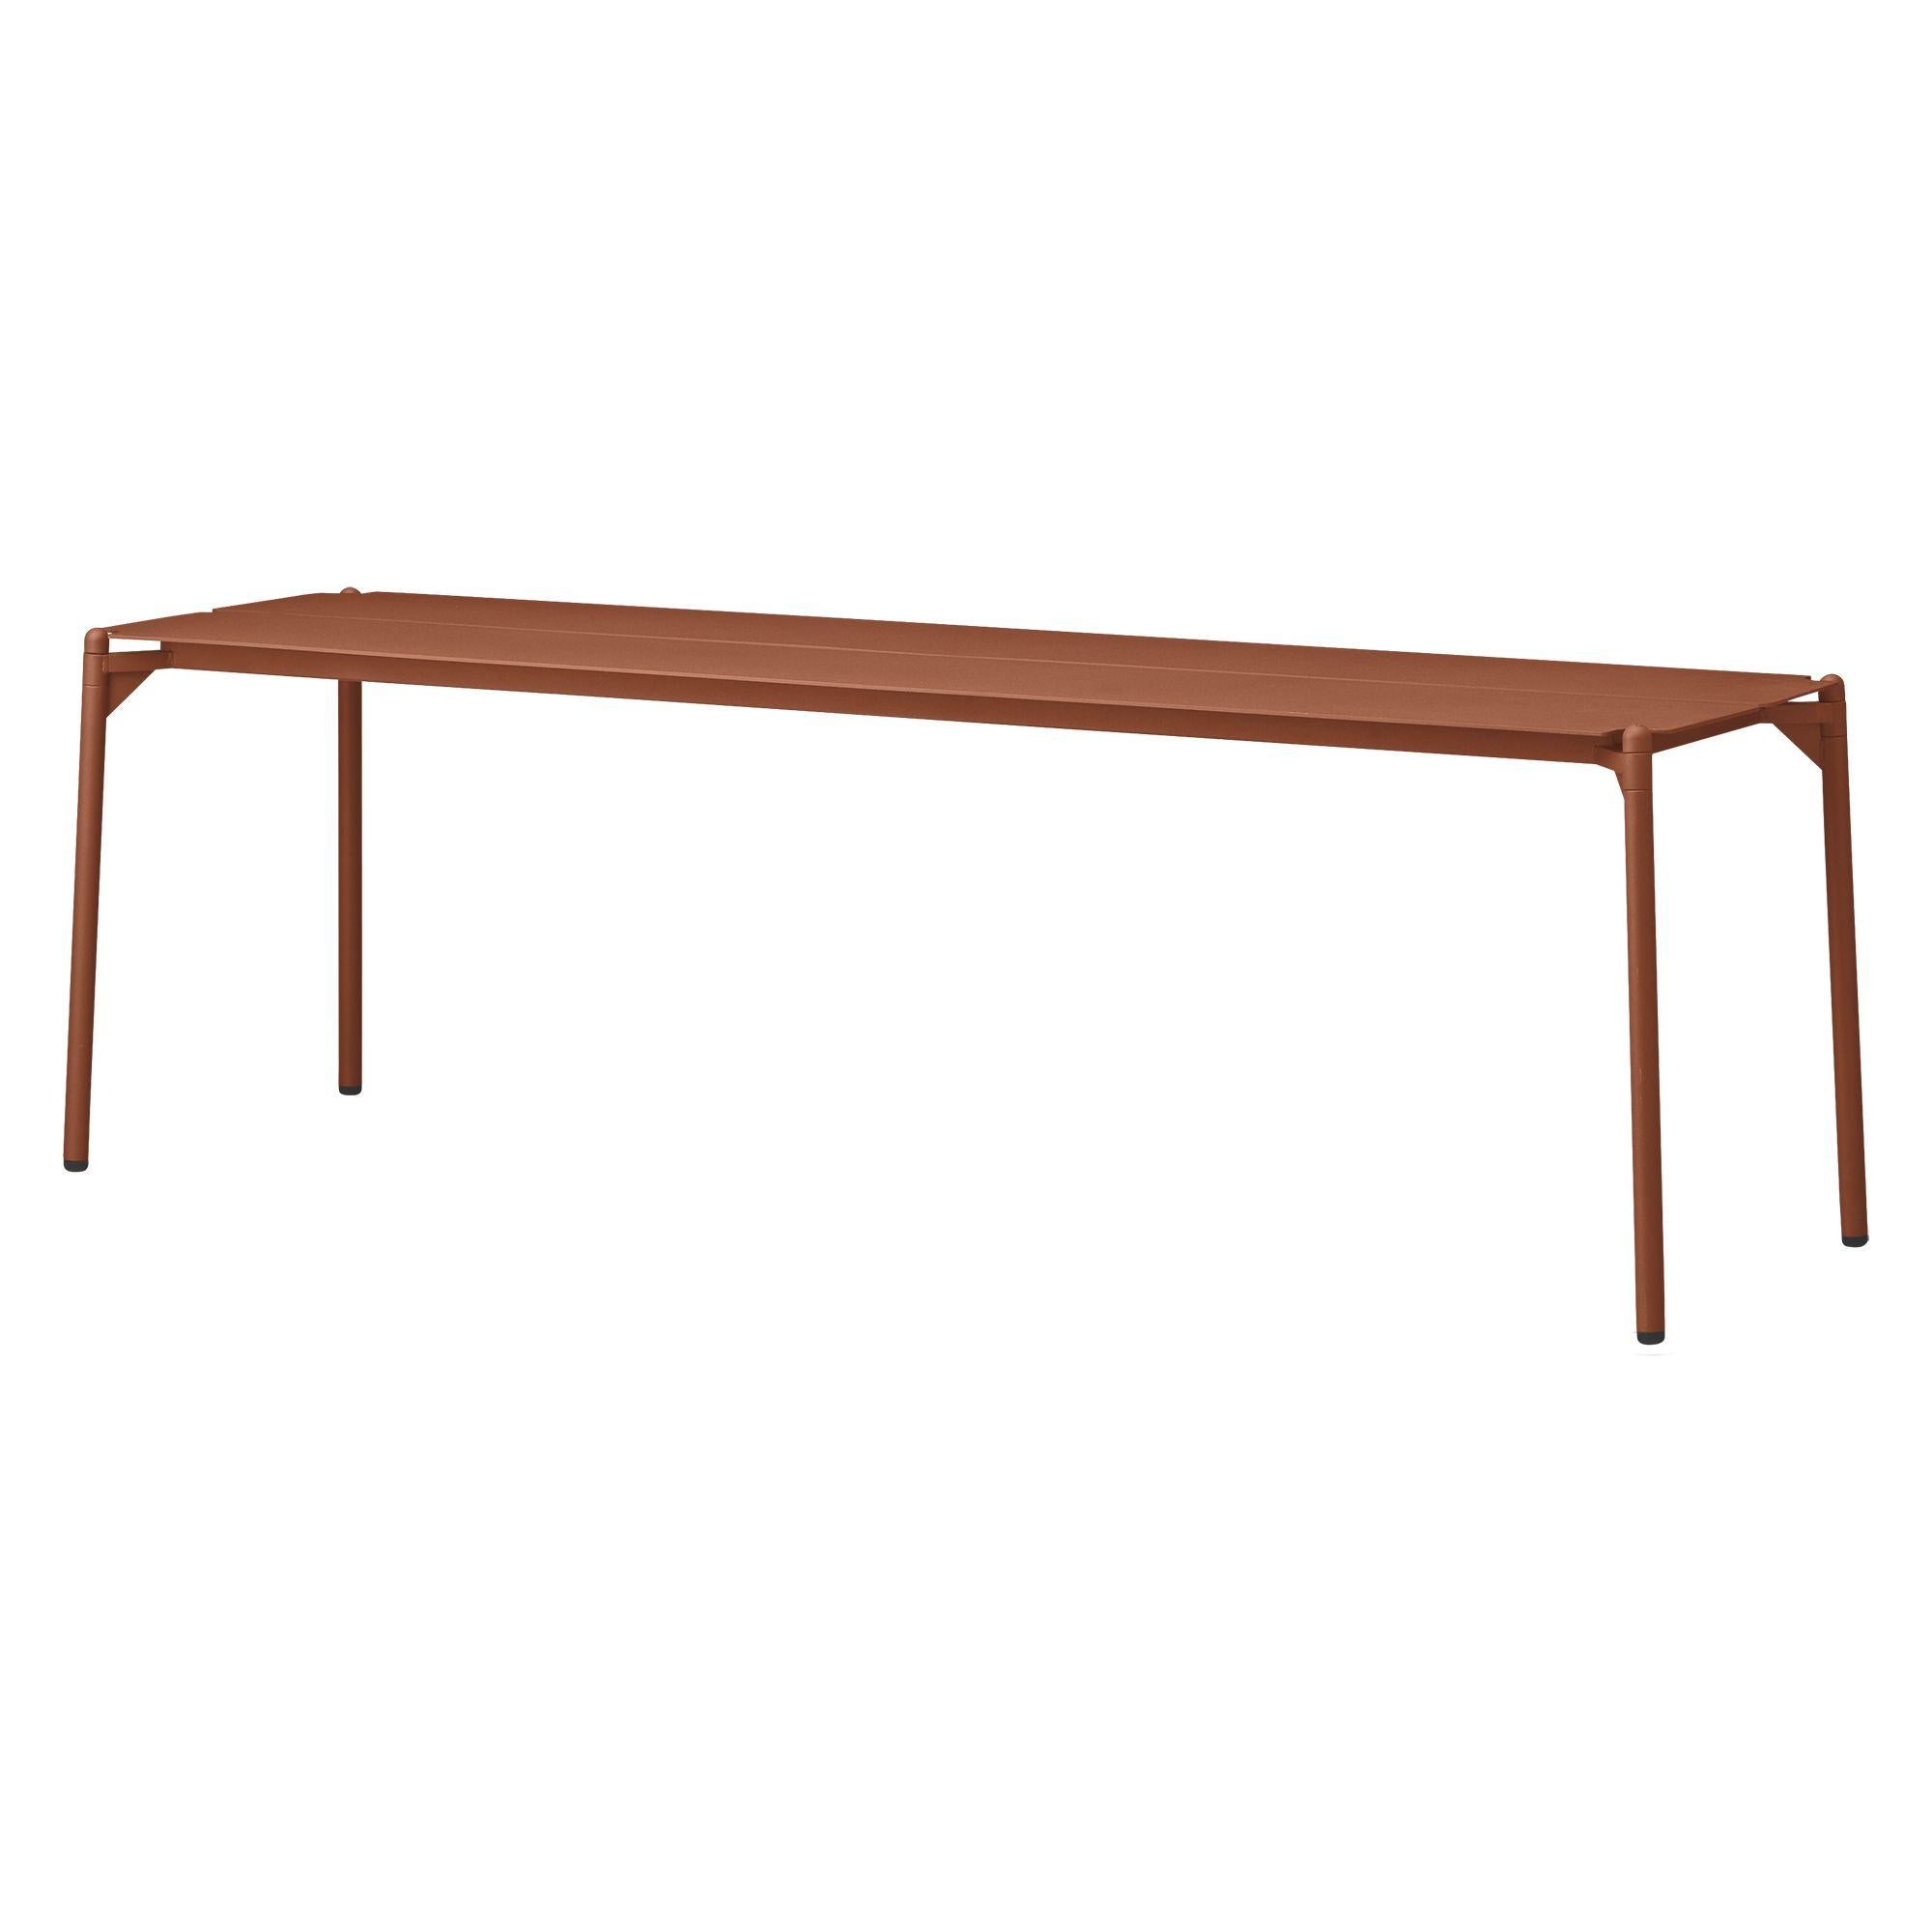 Ginger bread minimalist bench
Dimensions: D 145 x W 43.3 x H 45.5 cm 
Materials: Steel w. Matte powder coating & aluminum w. Matte powder coating.
Available in colors: Taupe, bordeaux, forest, ginger bread, black and, black and gold.

With NOVO